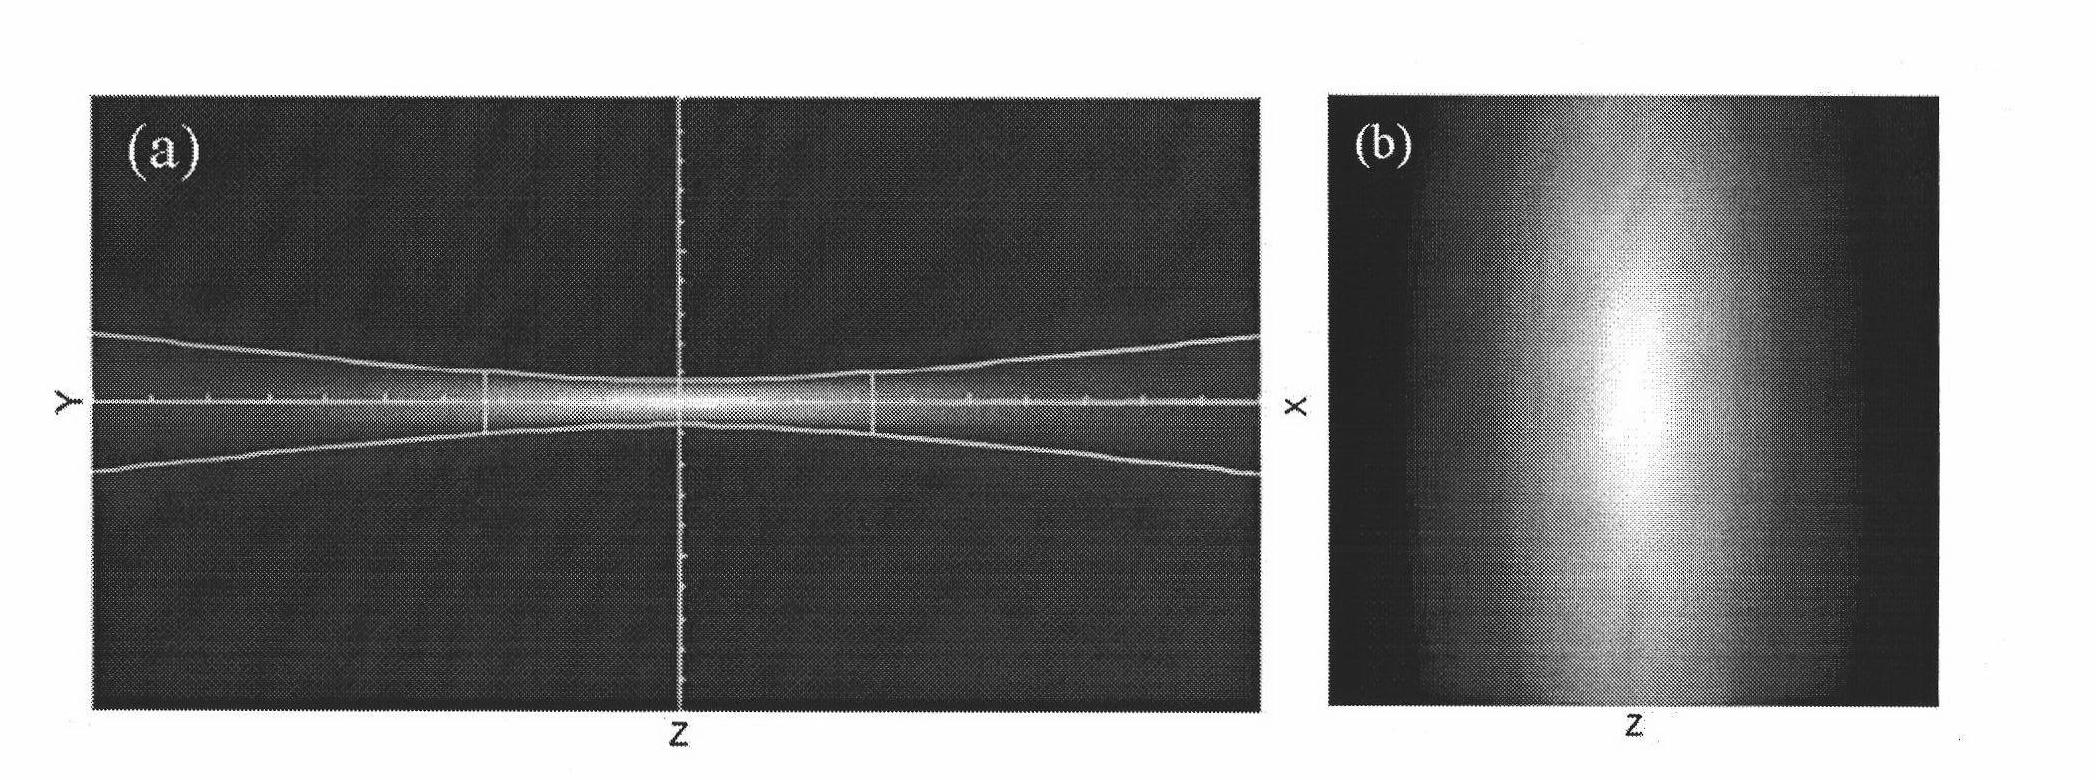 Fluorescence microscopy method to generate multi-layer polished sections by utilizing Fresnel biprism and device